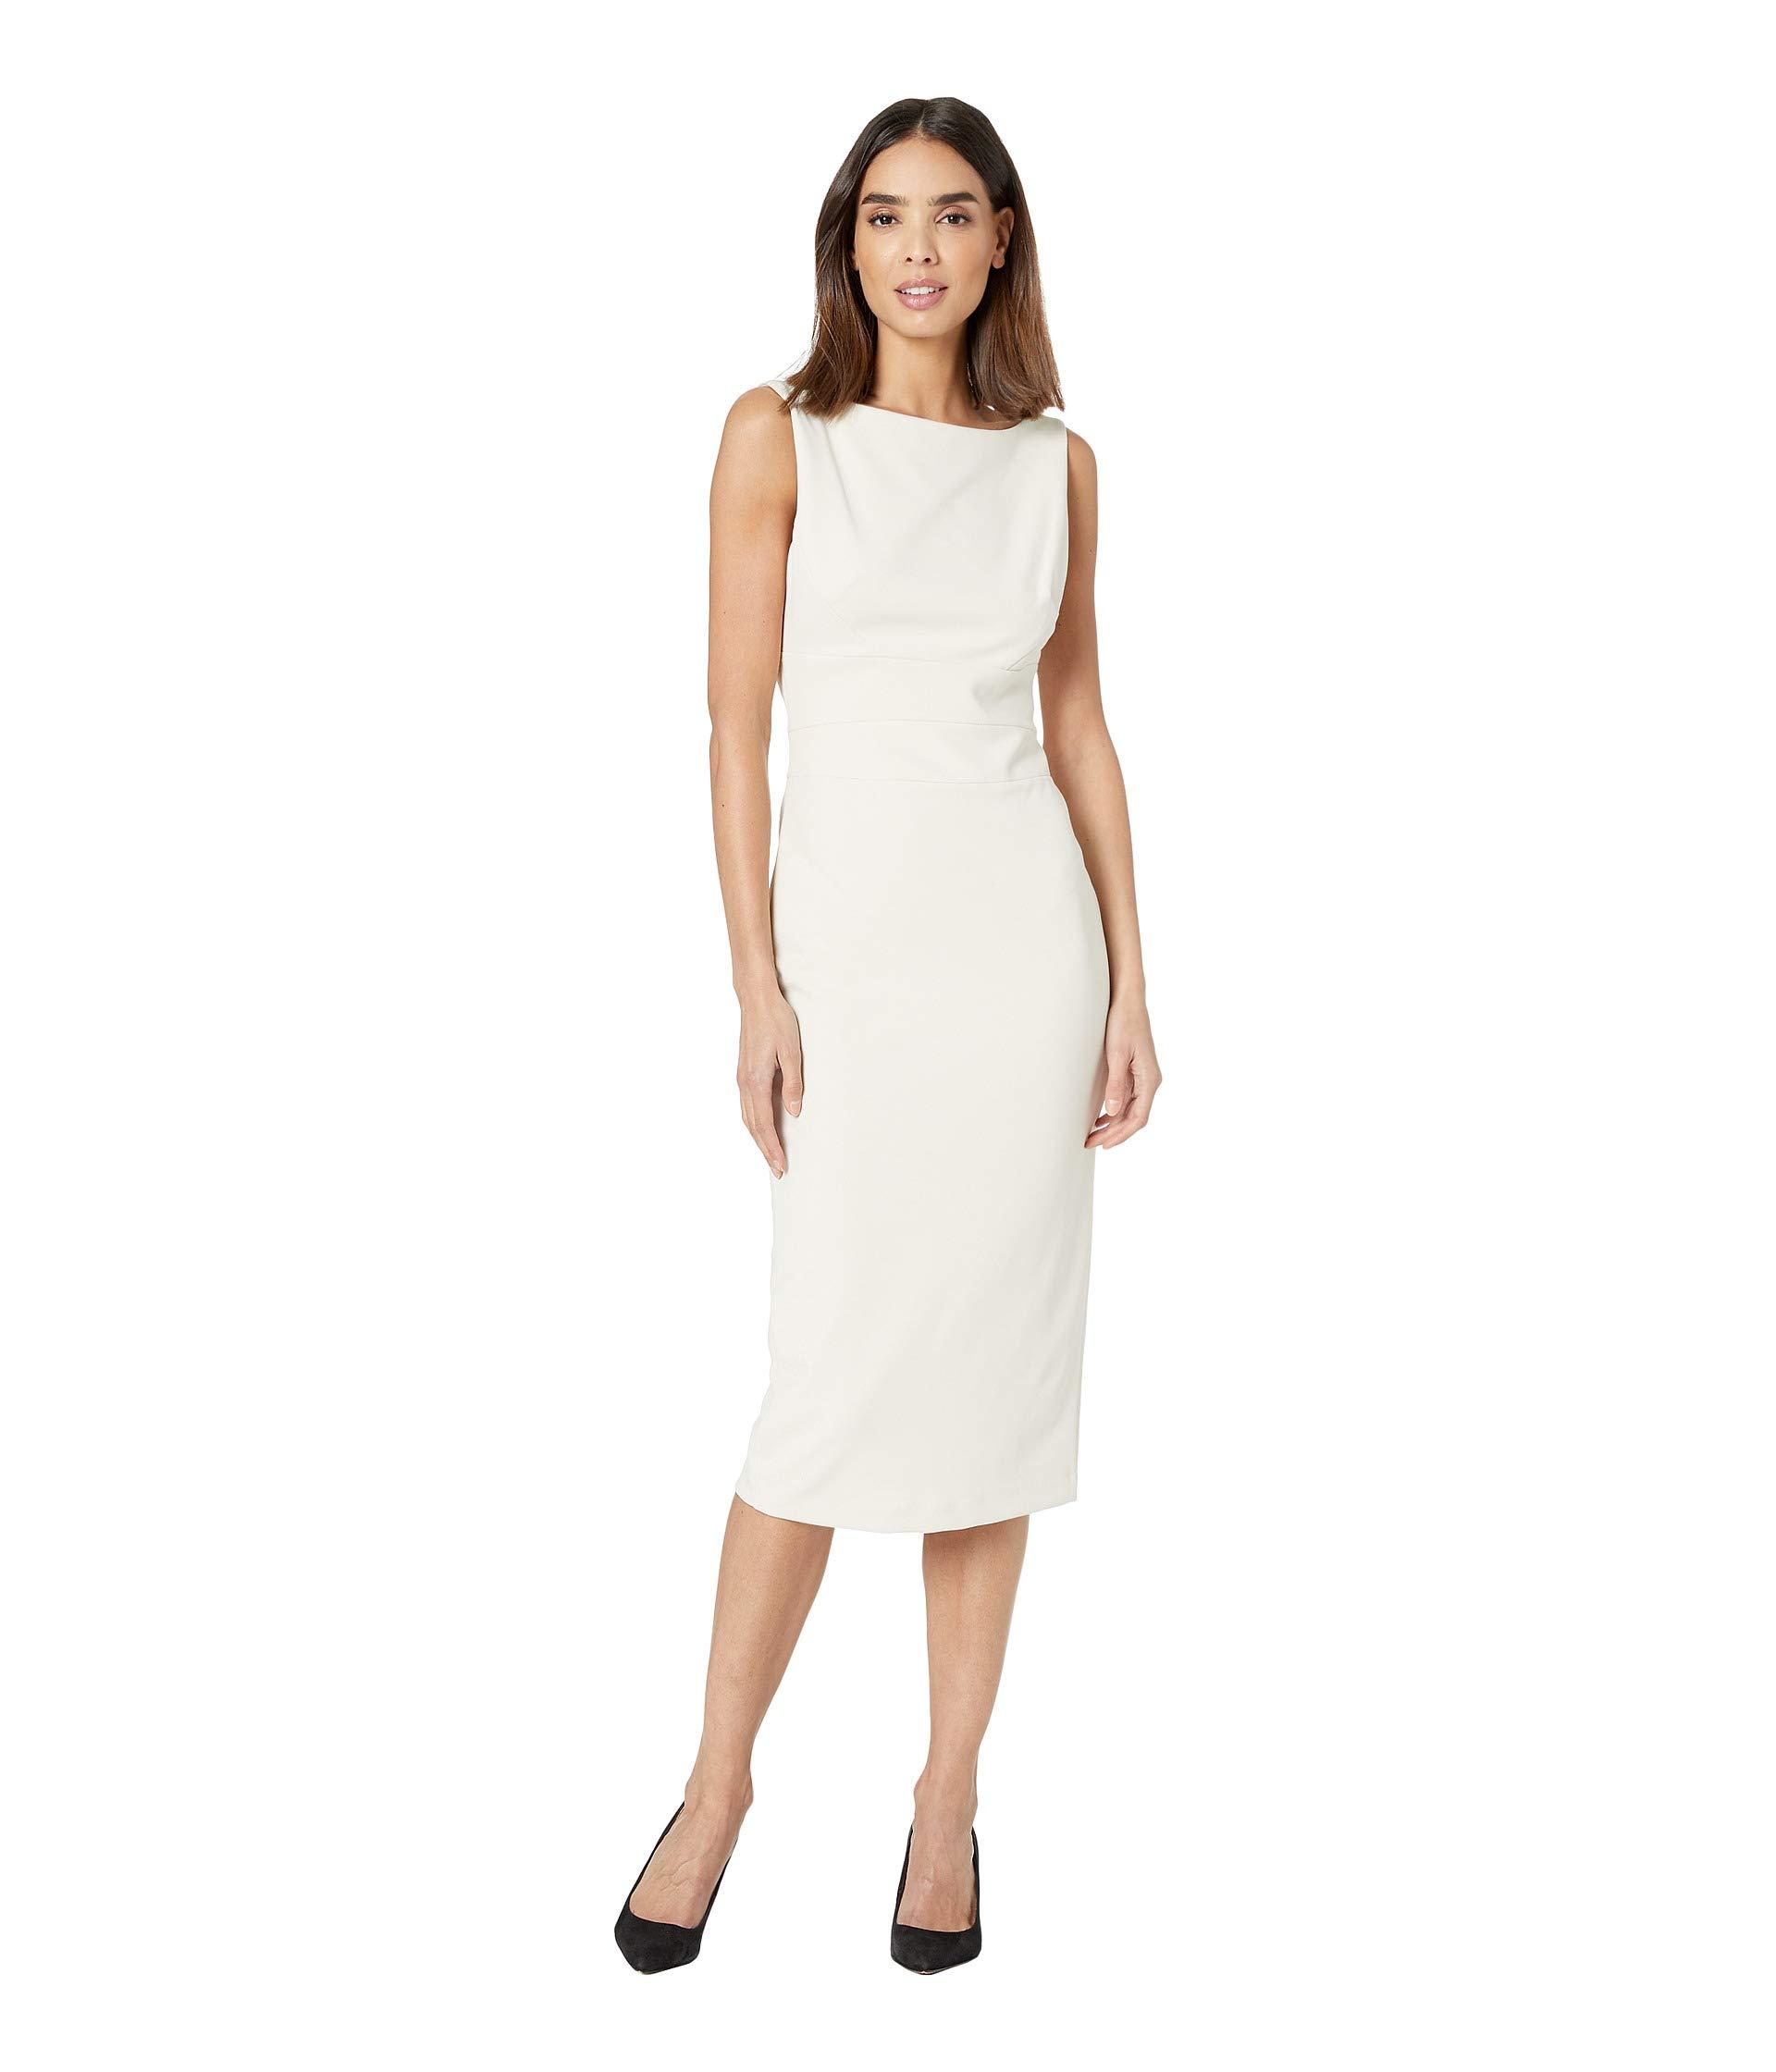 Lyst - Donna Morgan Sleeveless Crepe Sheath Dress With Boat Neck (horn ...